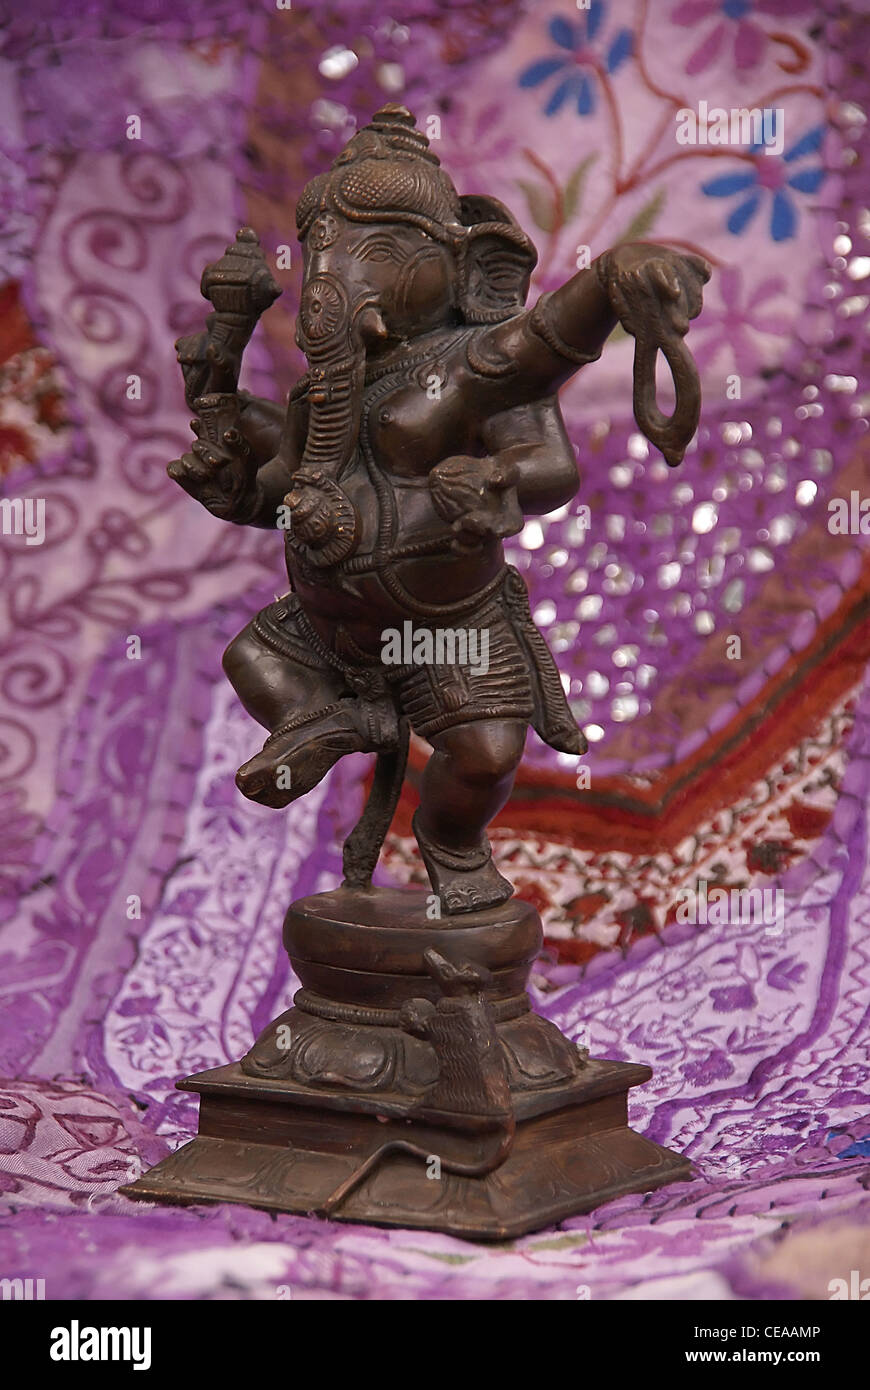 Bronze Ganesha dancing, on purple Rajasthani textile backdrop made from saris.  [Ganesha, the son of Shiva and Parvati, the elep Stock Photo